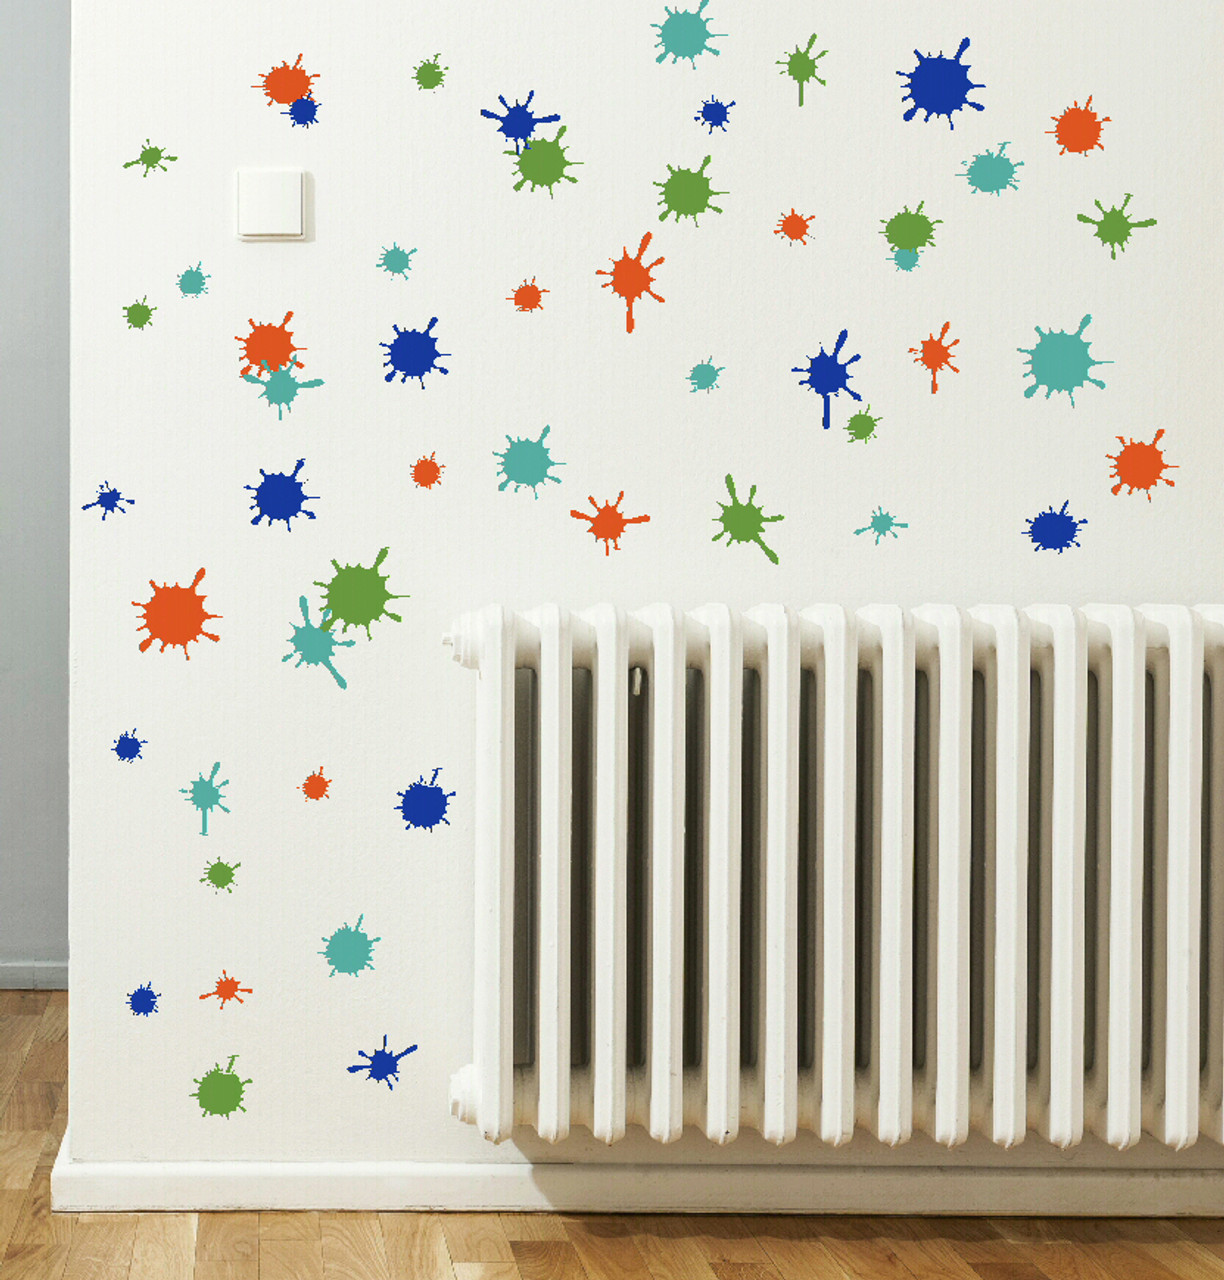 40 pcs Multicolor Paint Wall Decal Splatter and Splotches Wall